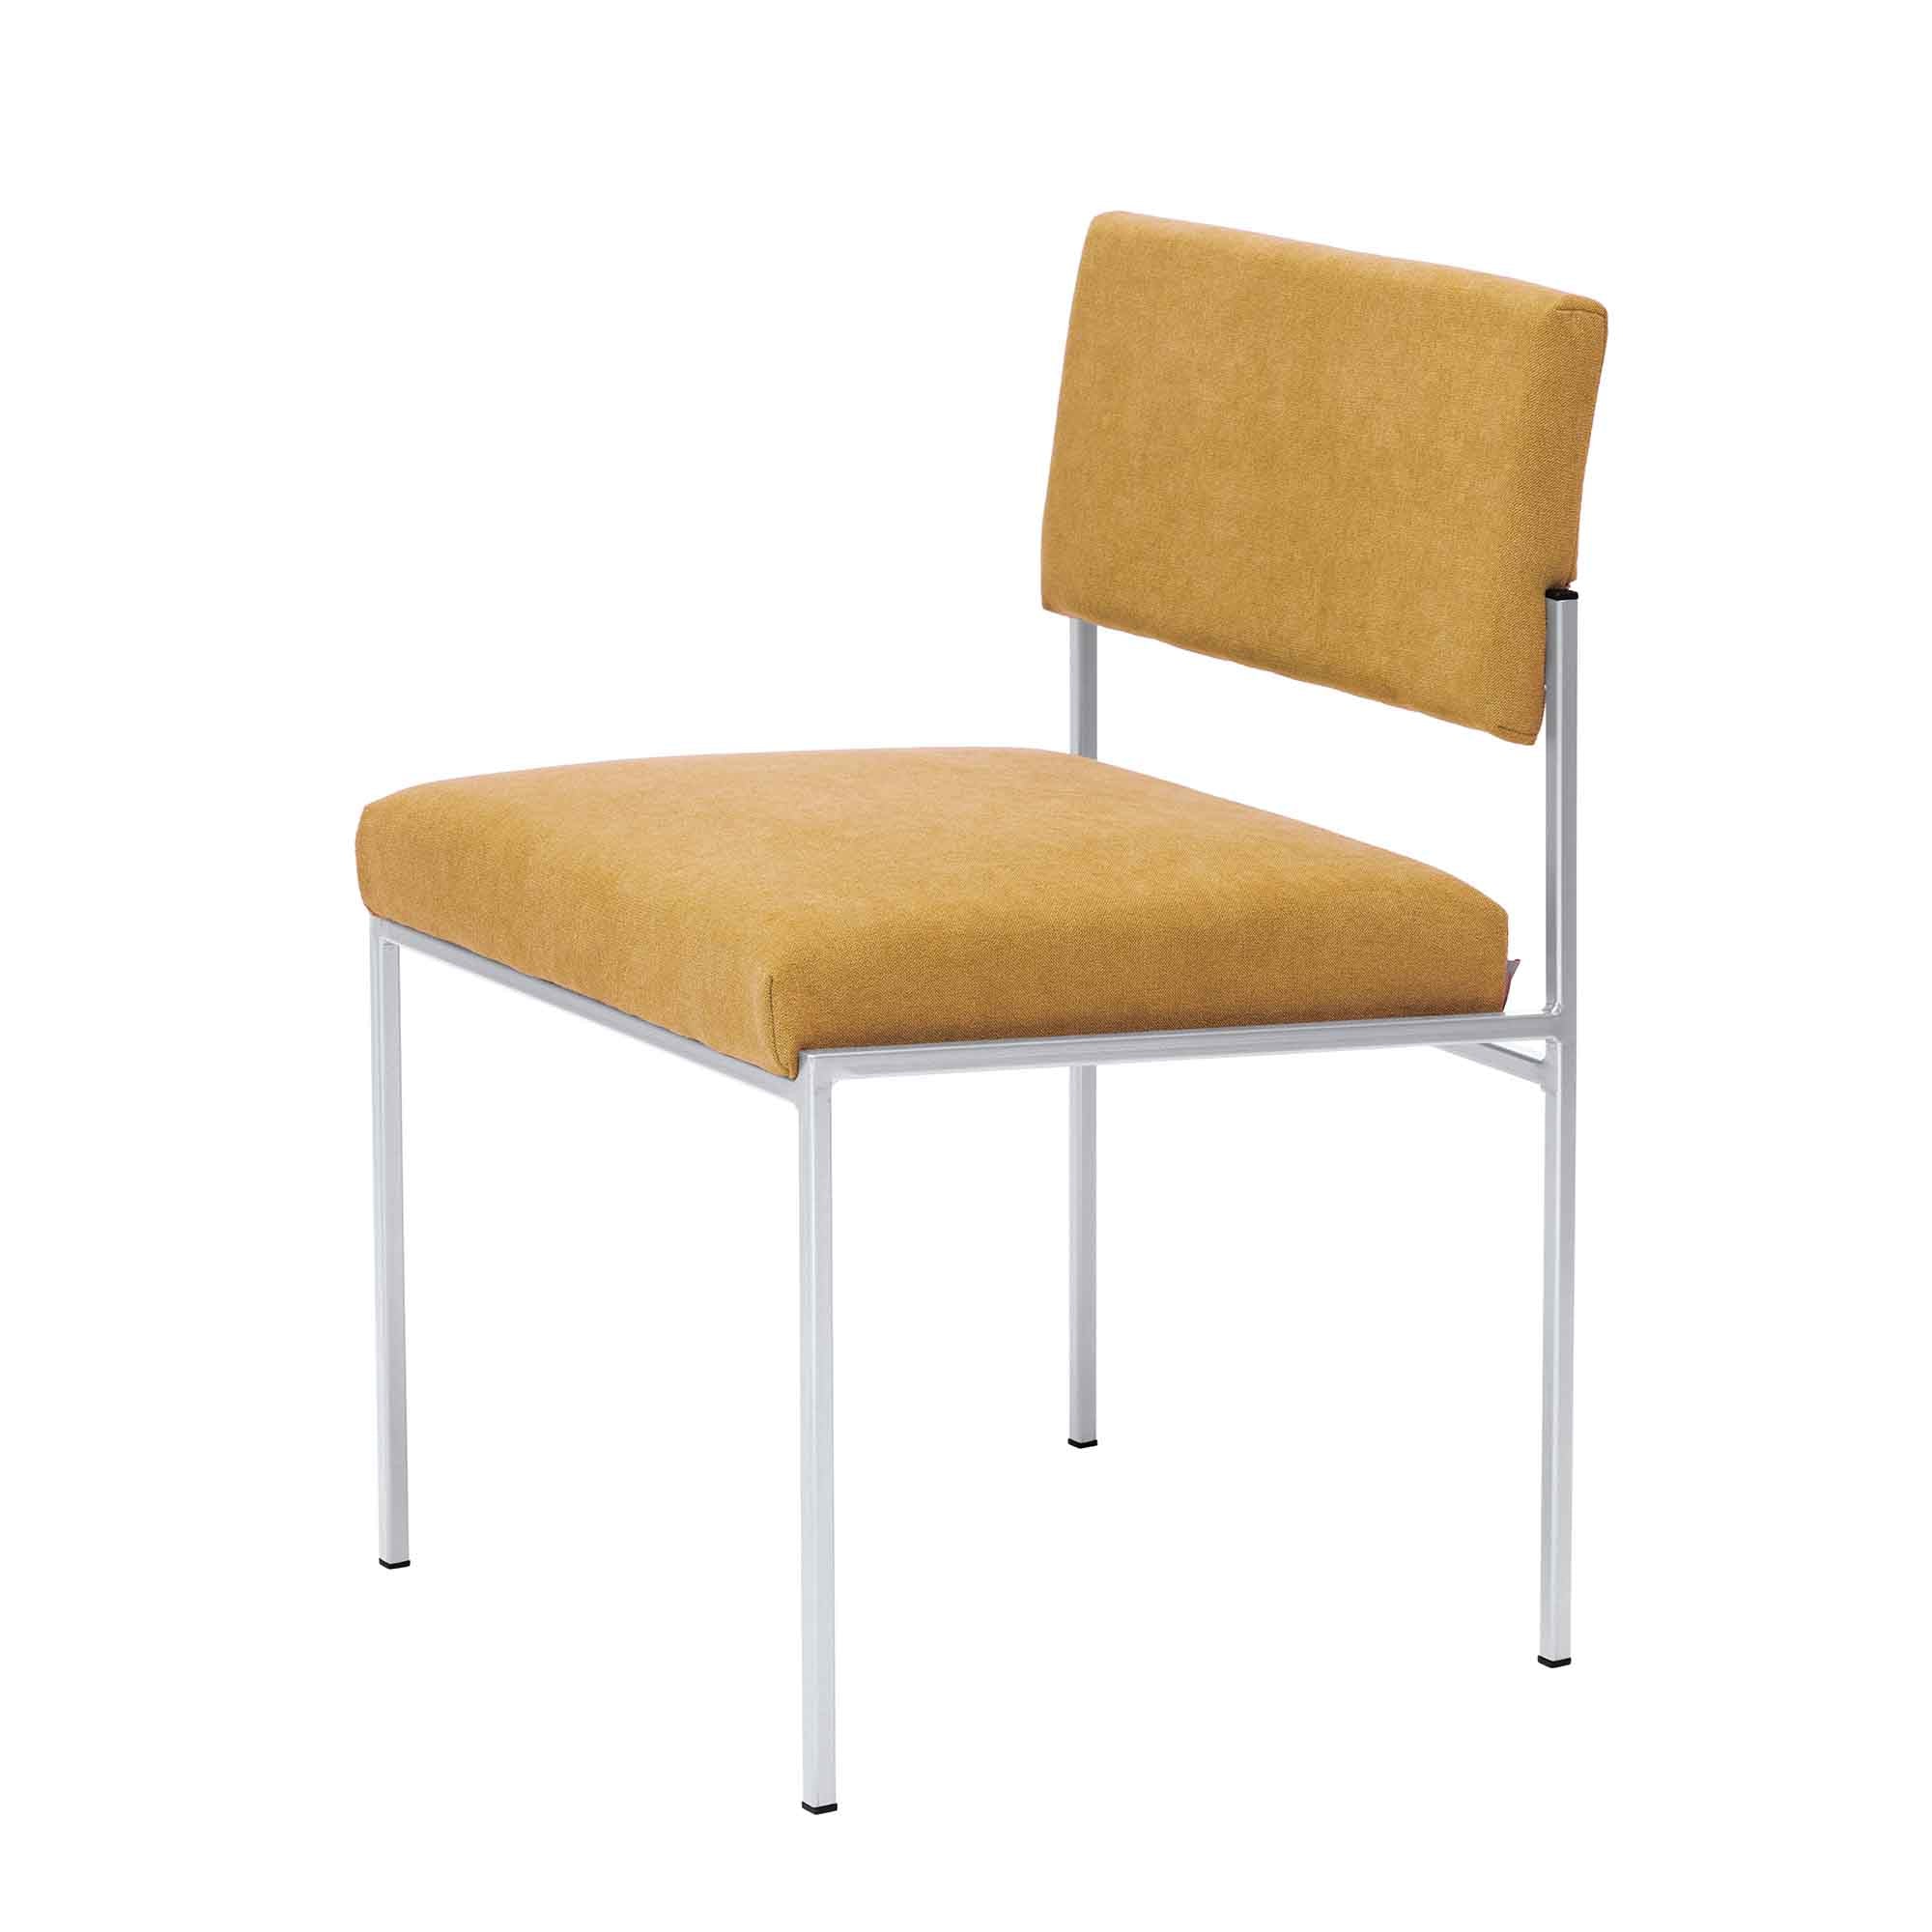  Chair, Powder-Coated Steel Frame yellow fabric, half-side view, white frame